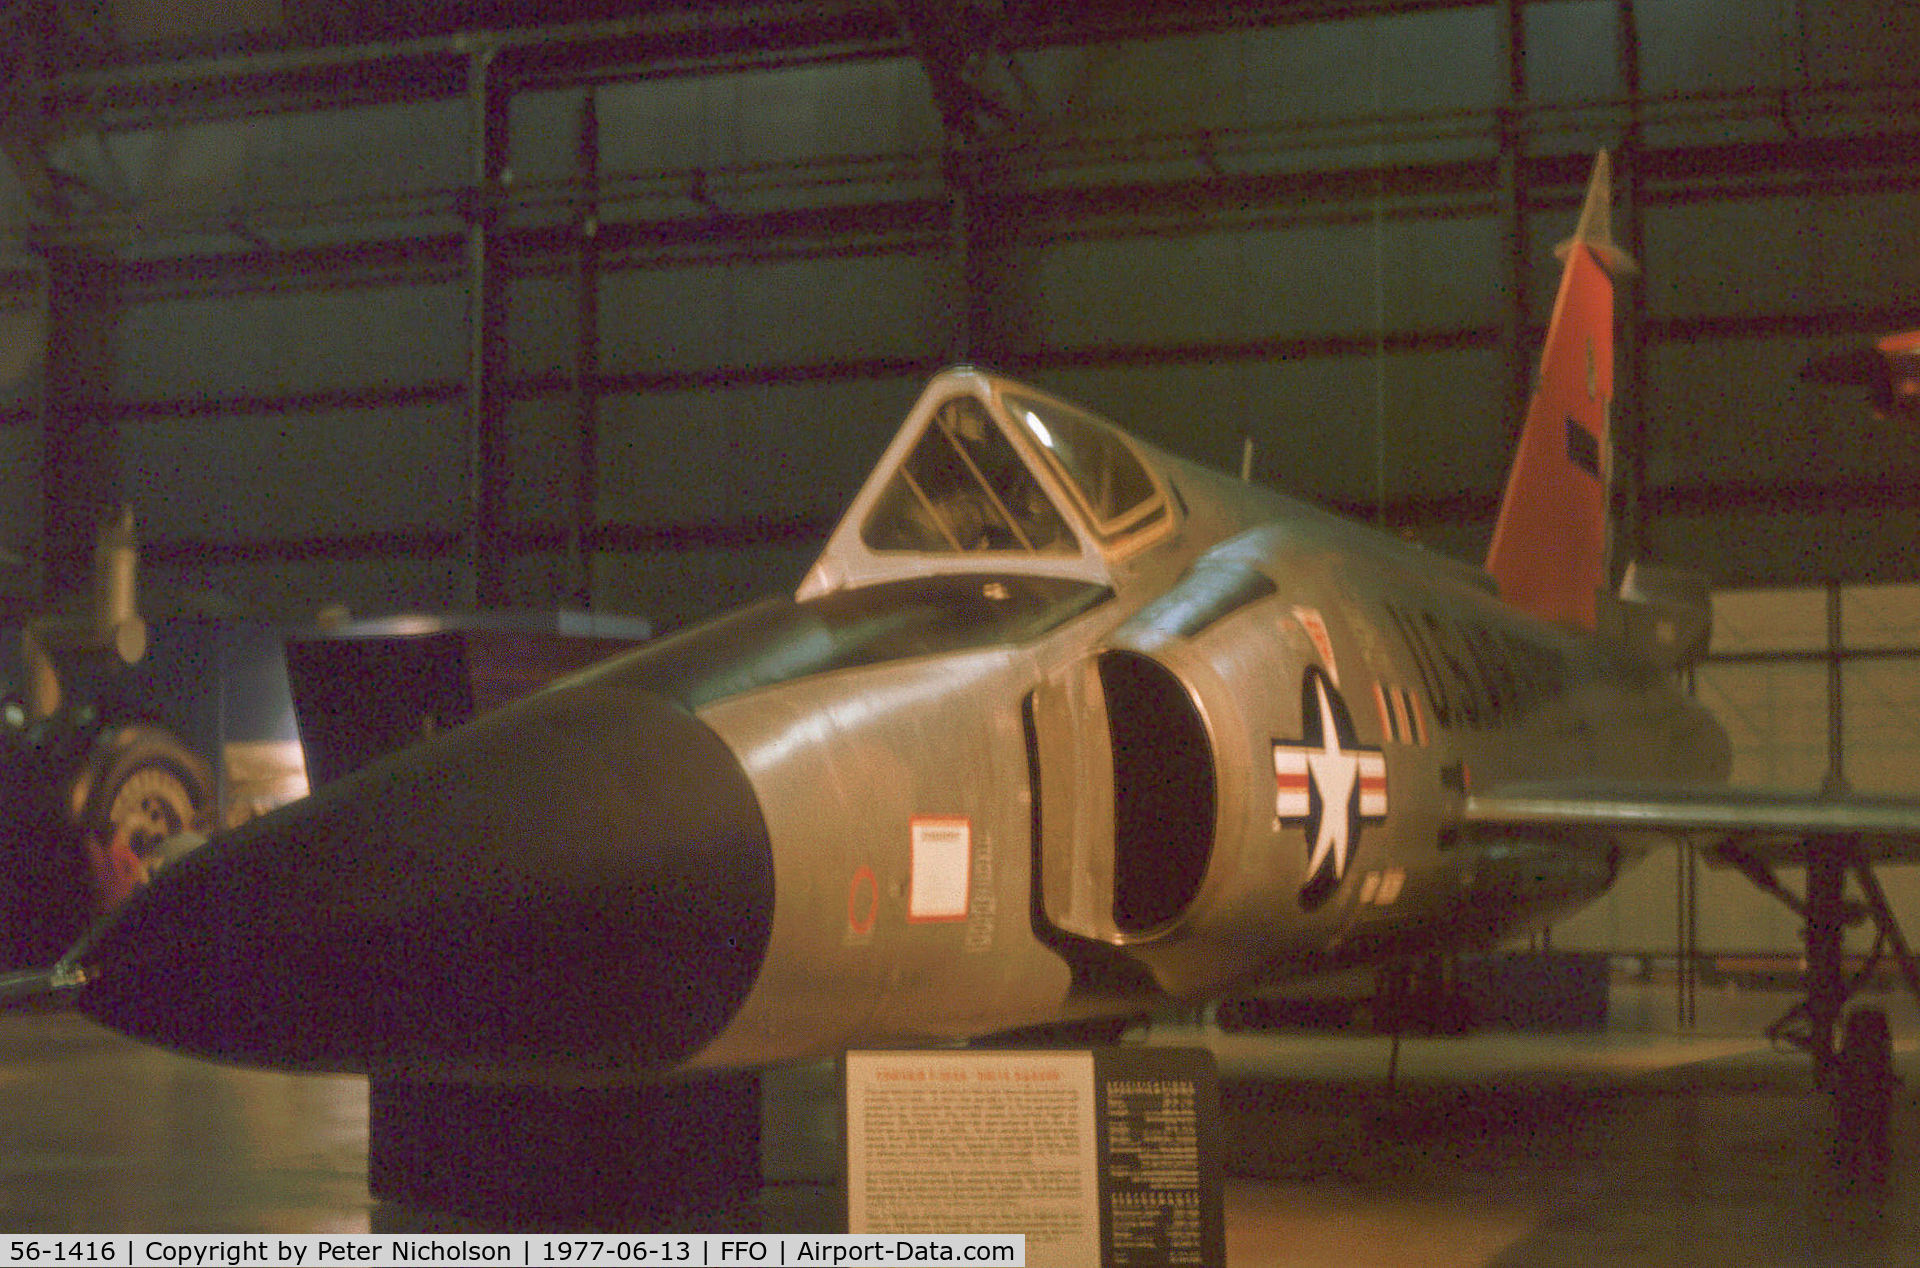 56-1416, 1956 Convair F-102A Delta Dagger C/N 8-10-363, F-102A Delta Dagger of 57th Fighter Interceptor Squadron at Keflavik as displayed at the USAF Museum in 1977.